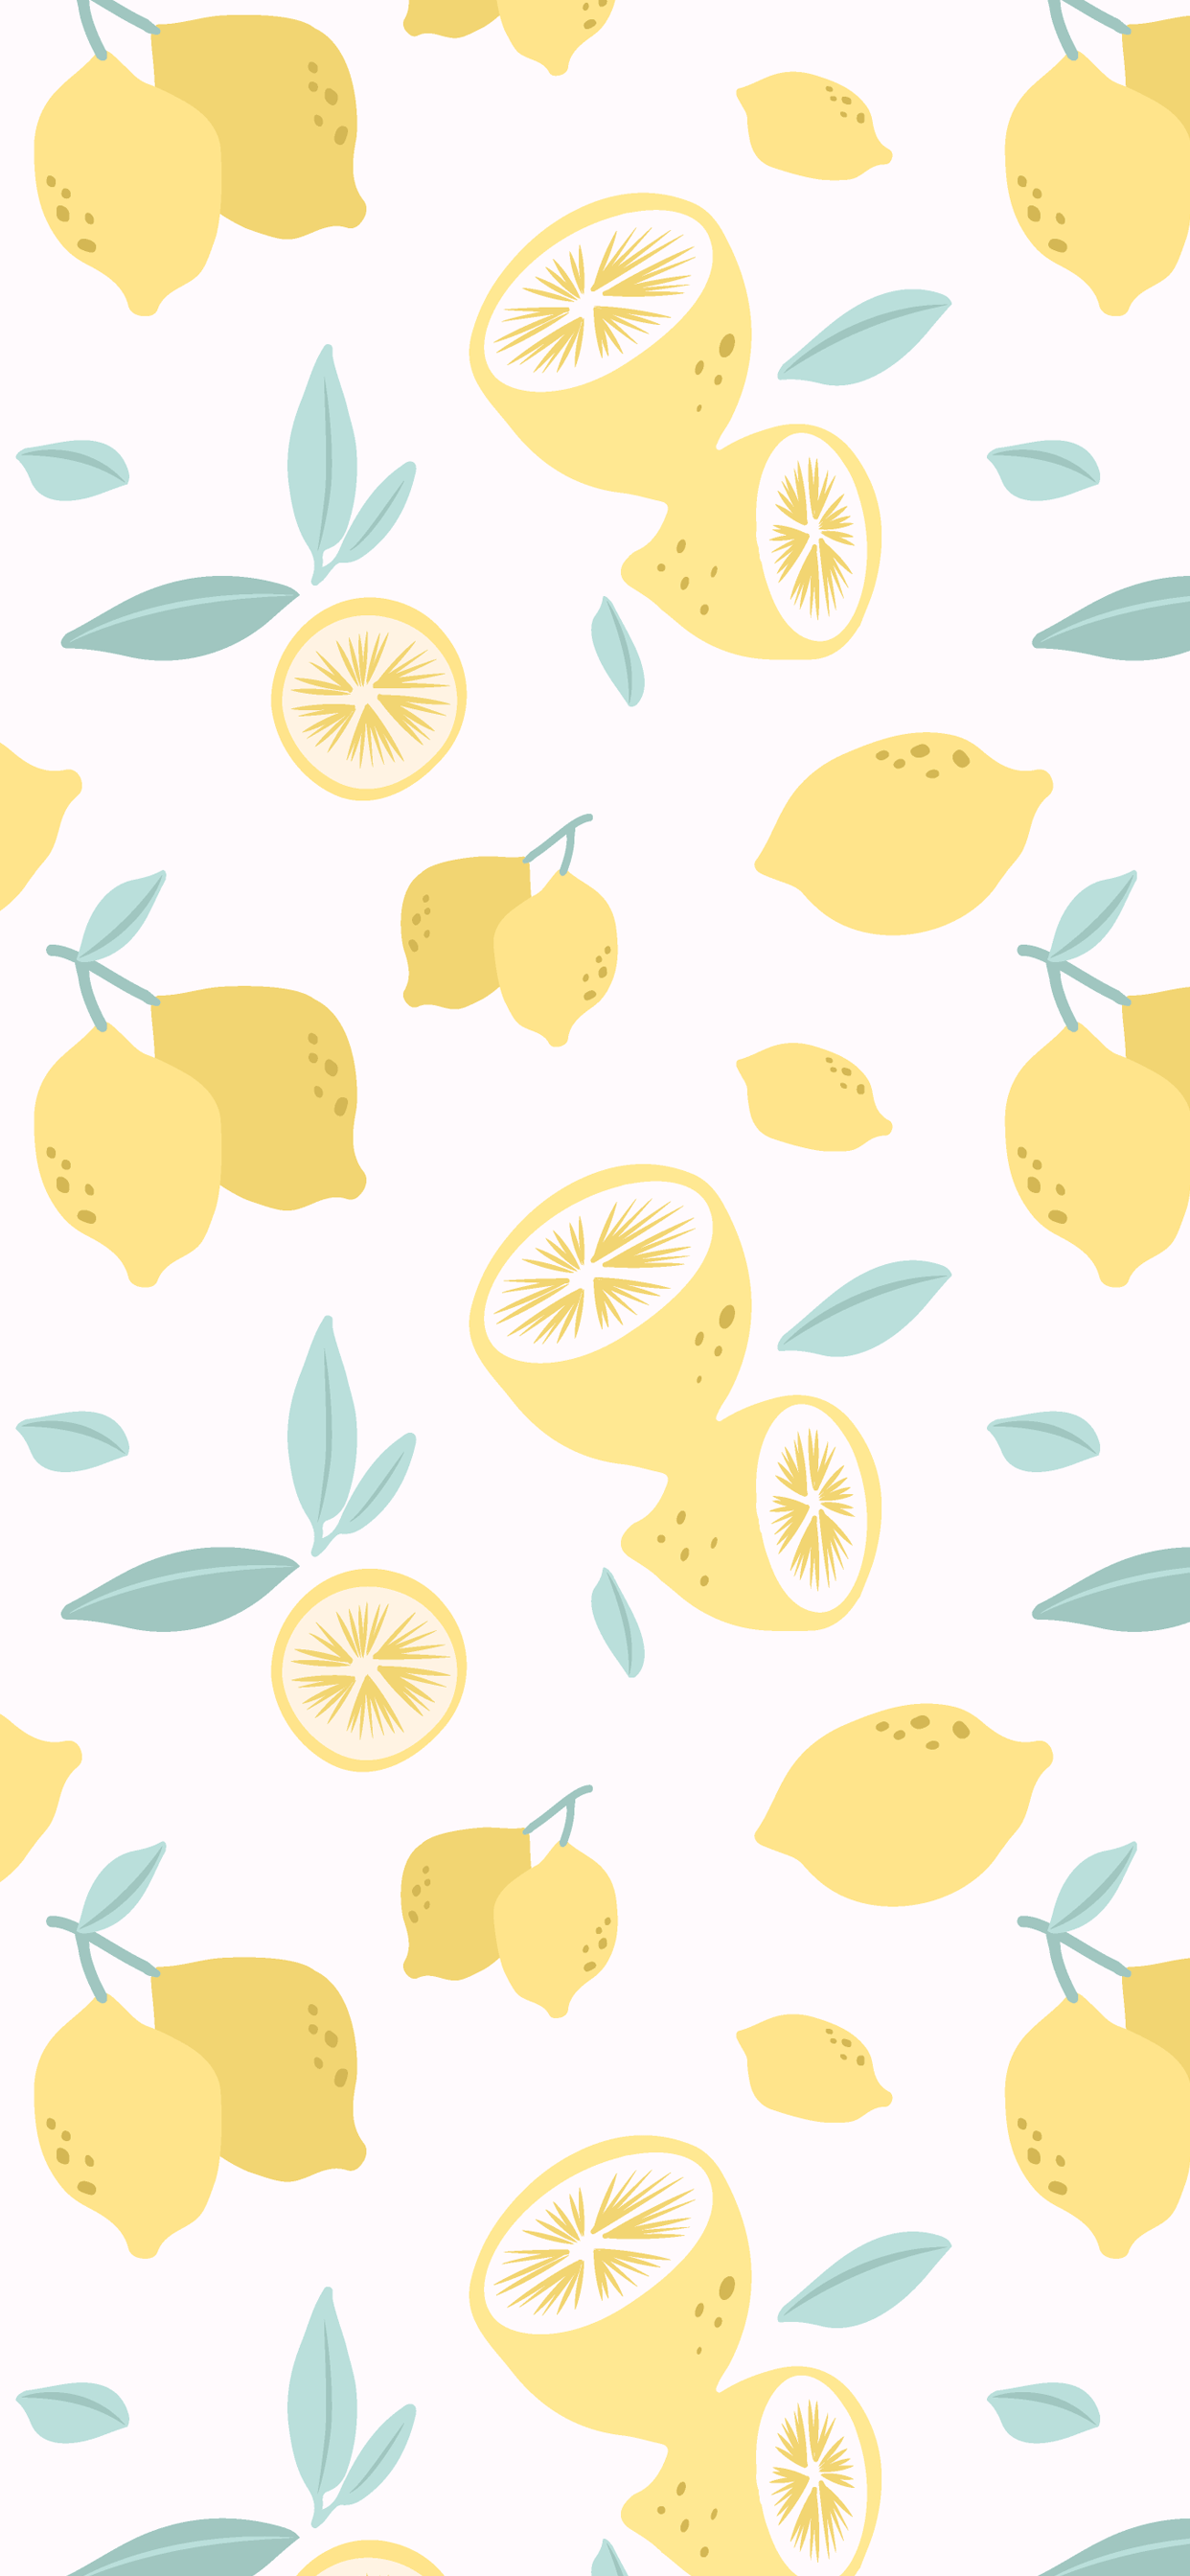 A pattern of whole and sliced lemons and leaves on a white background. - Lemon